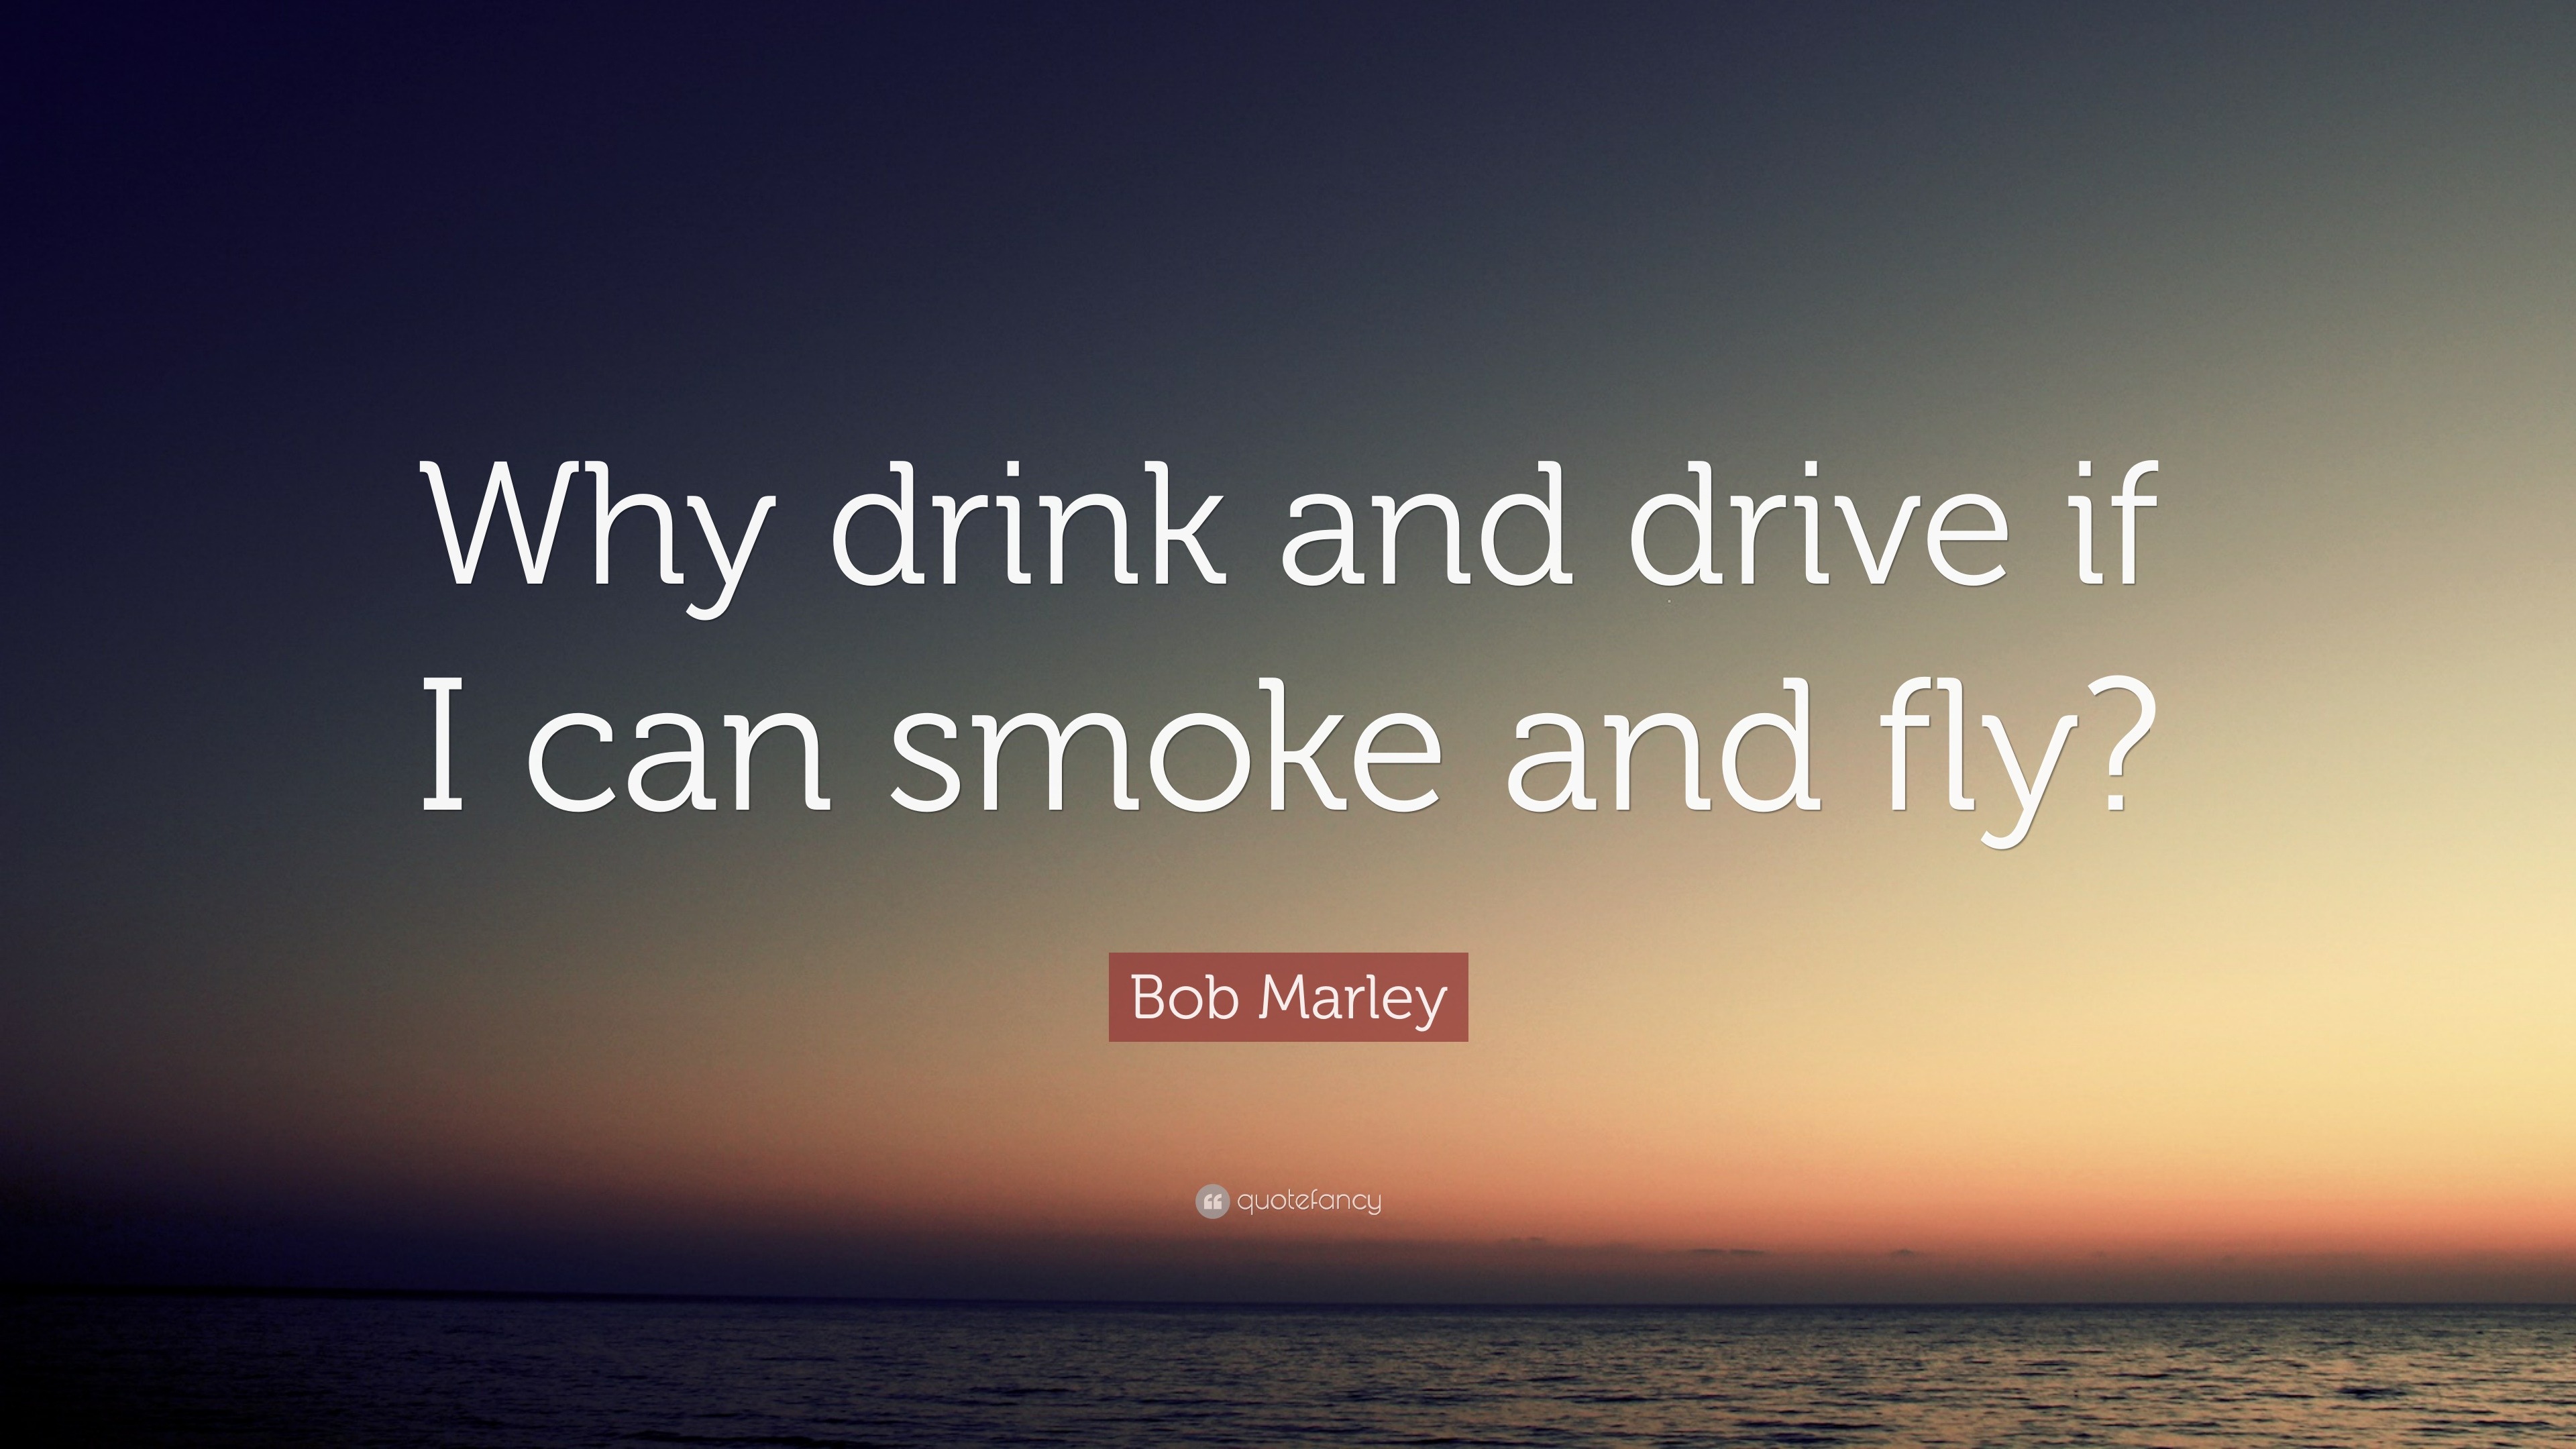 Bob Marley Quote: “Why drink and drive if I can smoke and fly?” (11